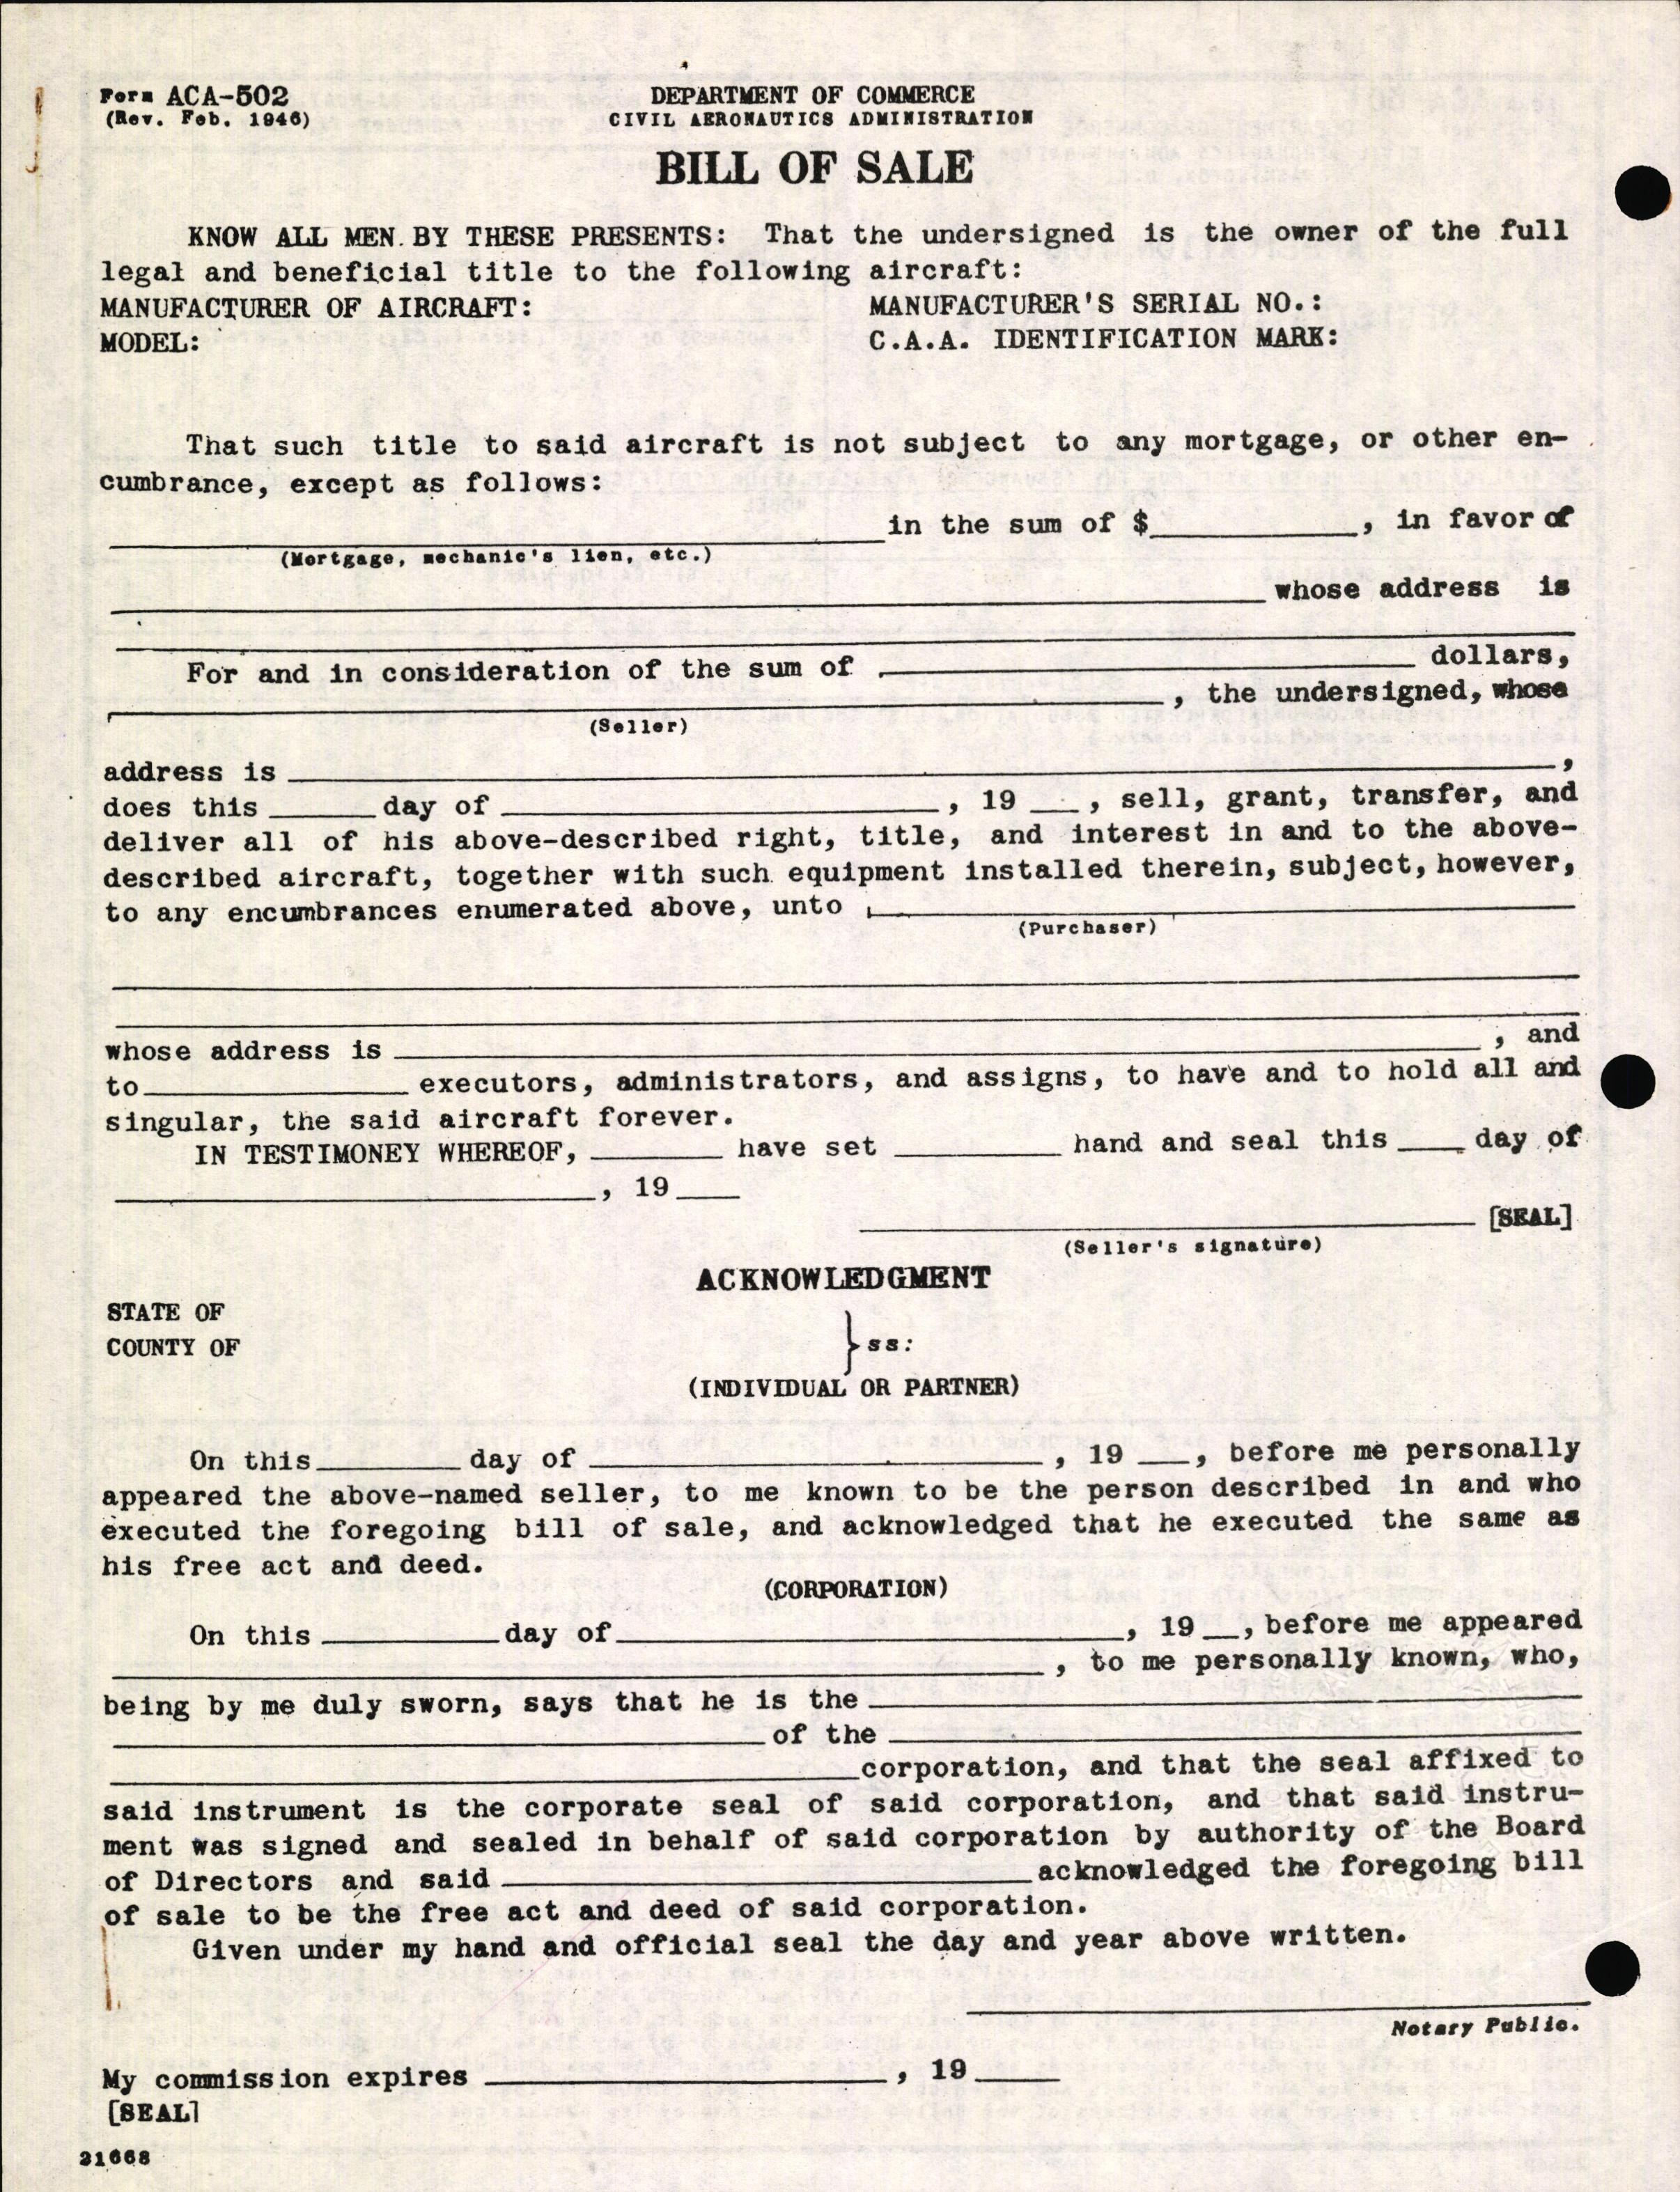 Sample page 4 from AirCorps Library document: Technical Information for Serial Number 2235